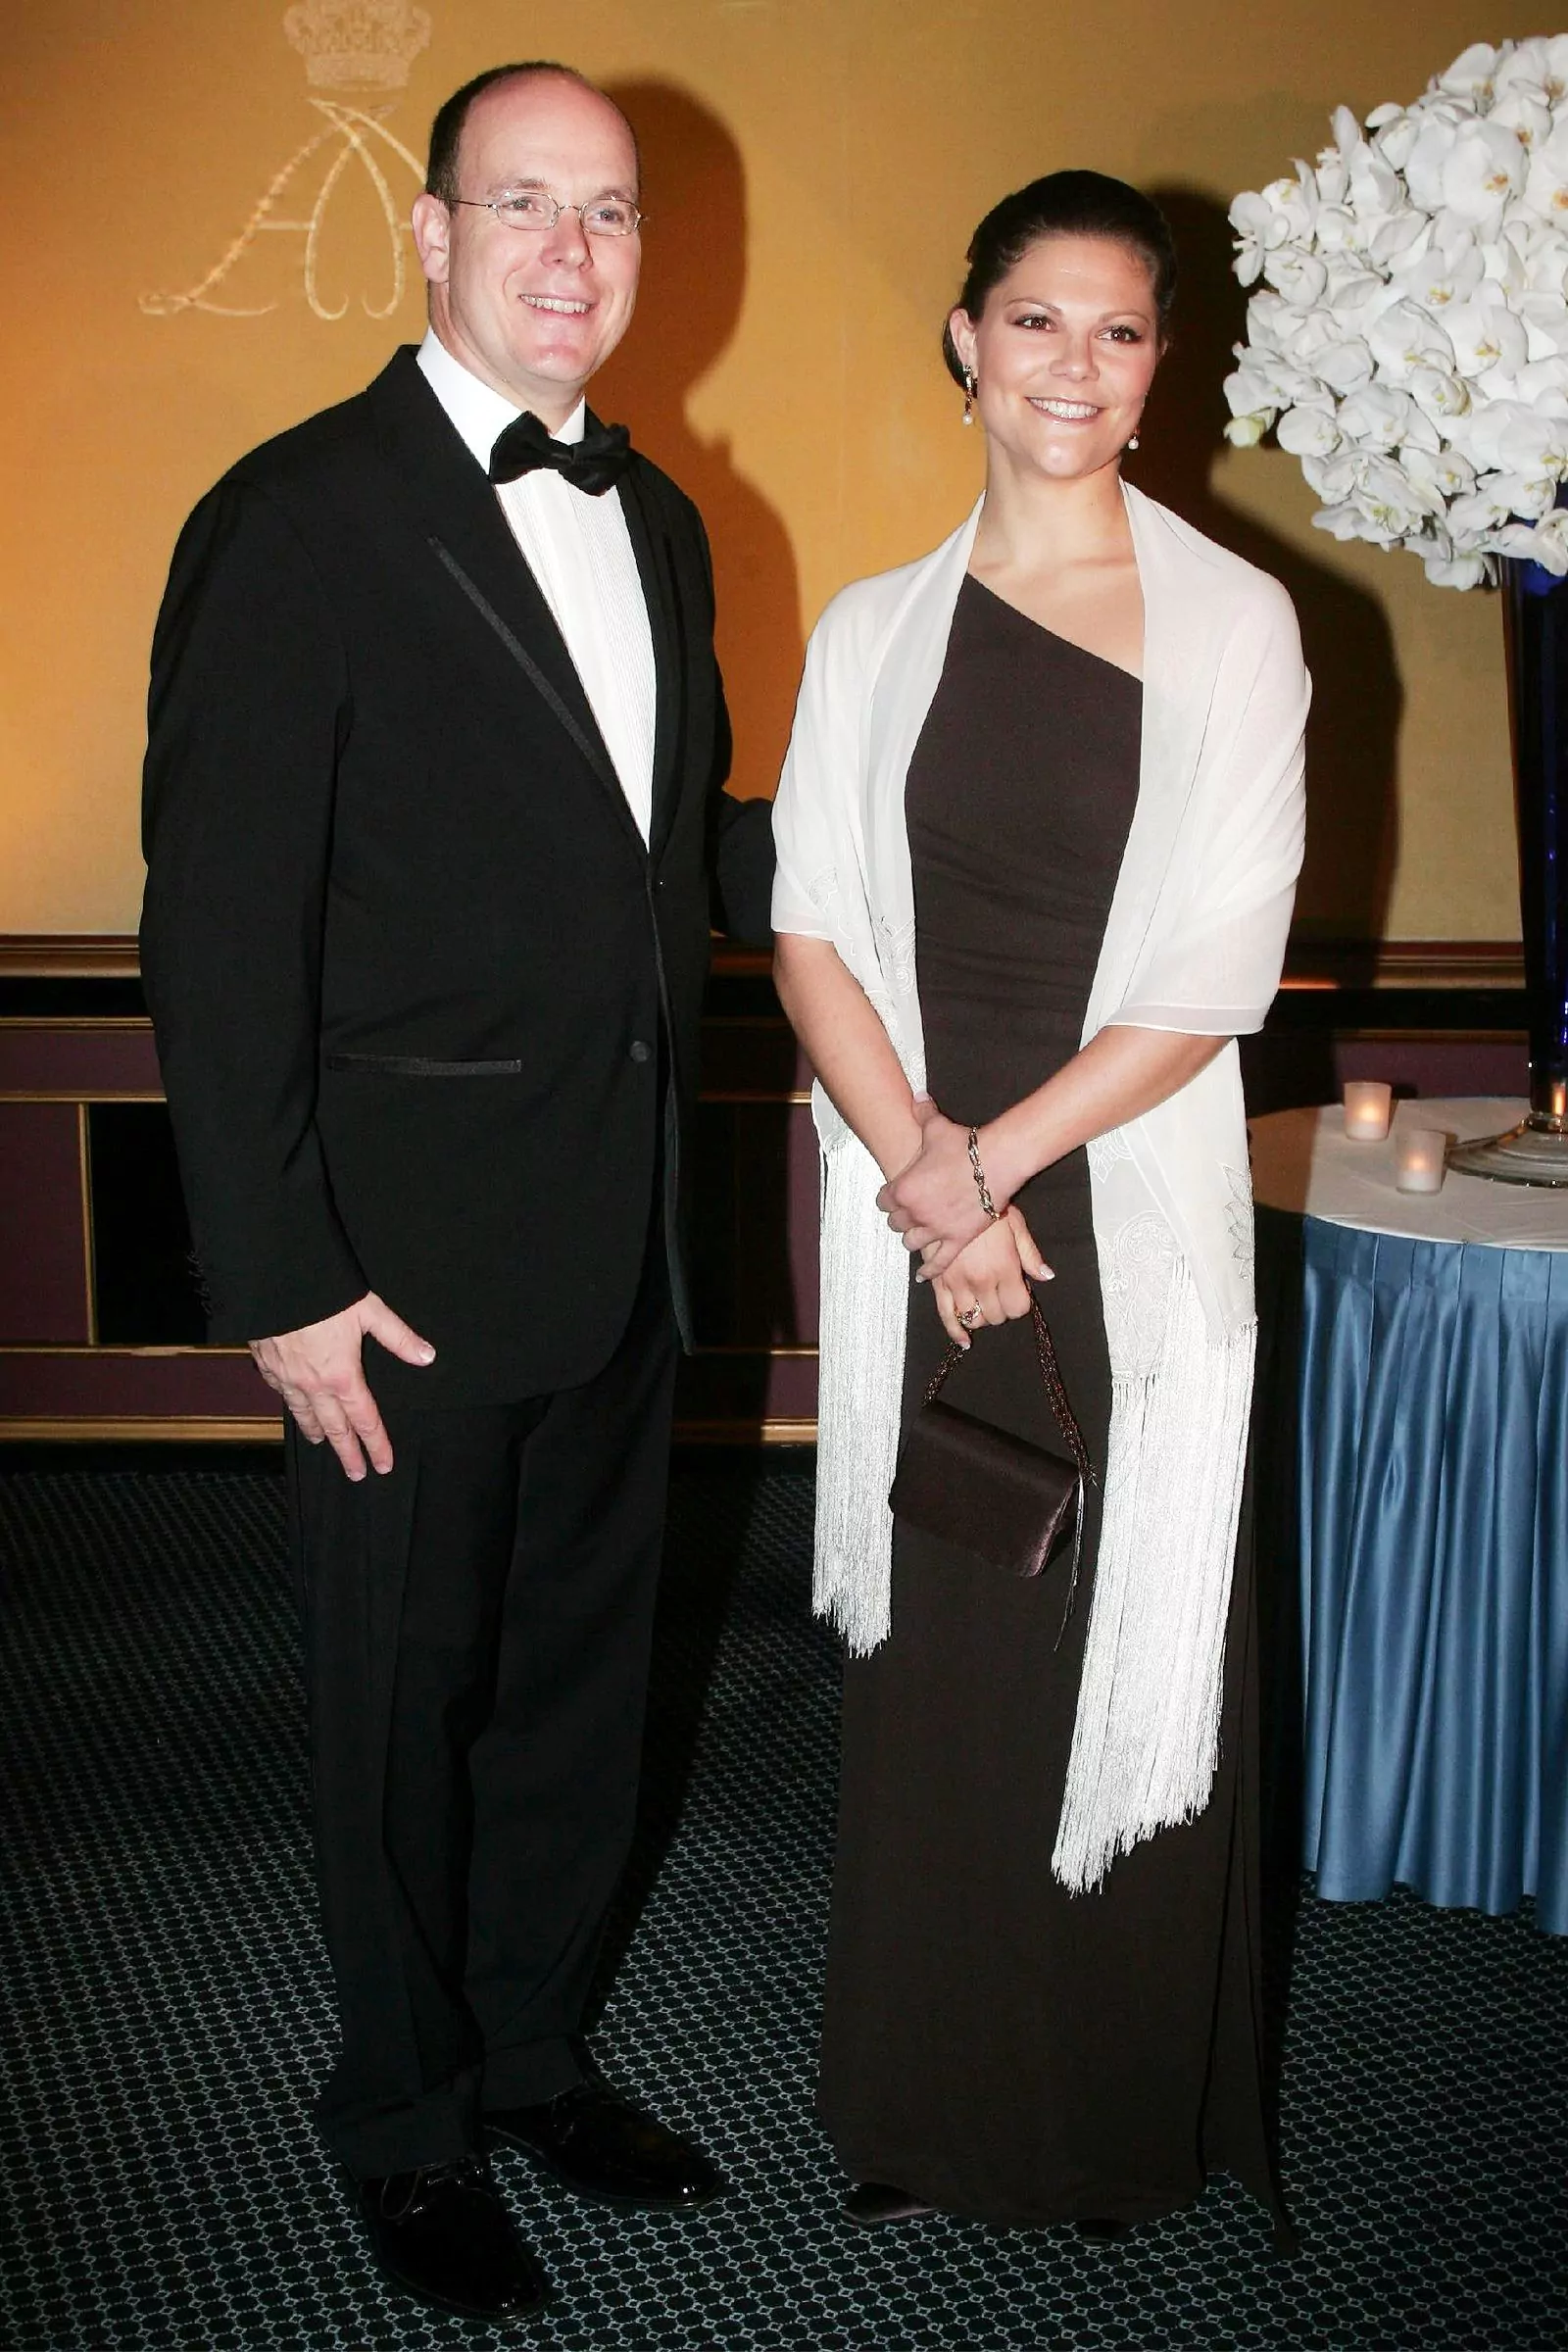 Prince Albert and Princess Victoria at a ceremony marking the official appointment of Prince Albert as Ruler of Monaco, November 17, 2005.